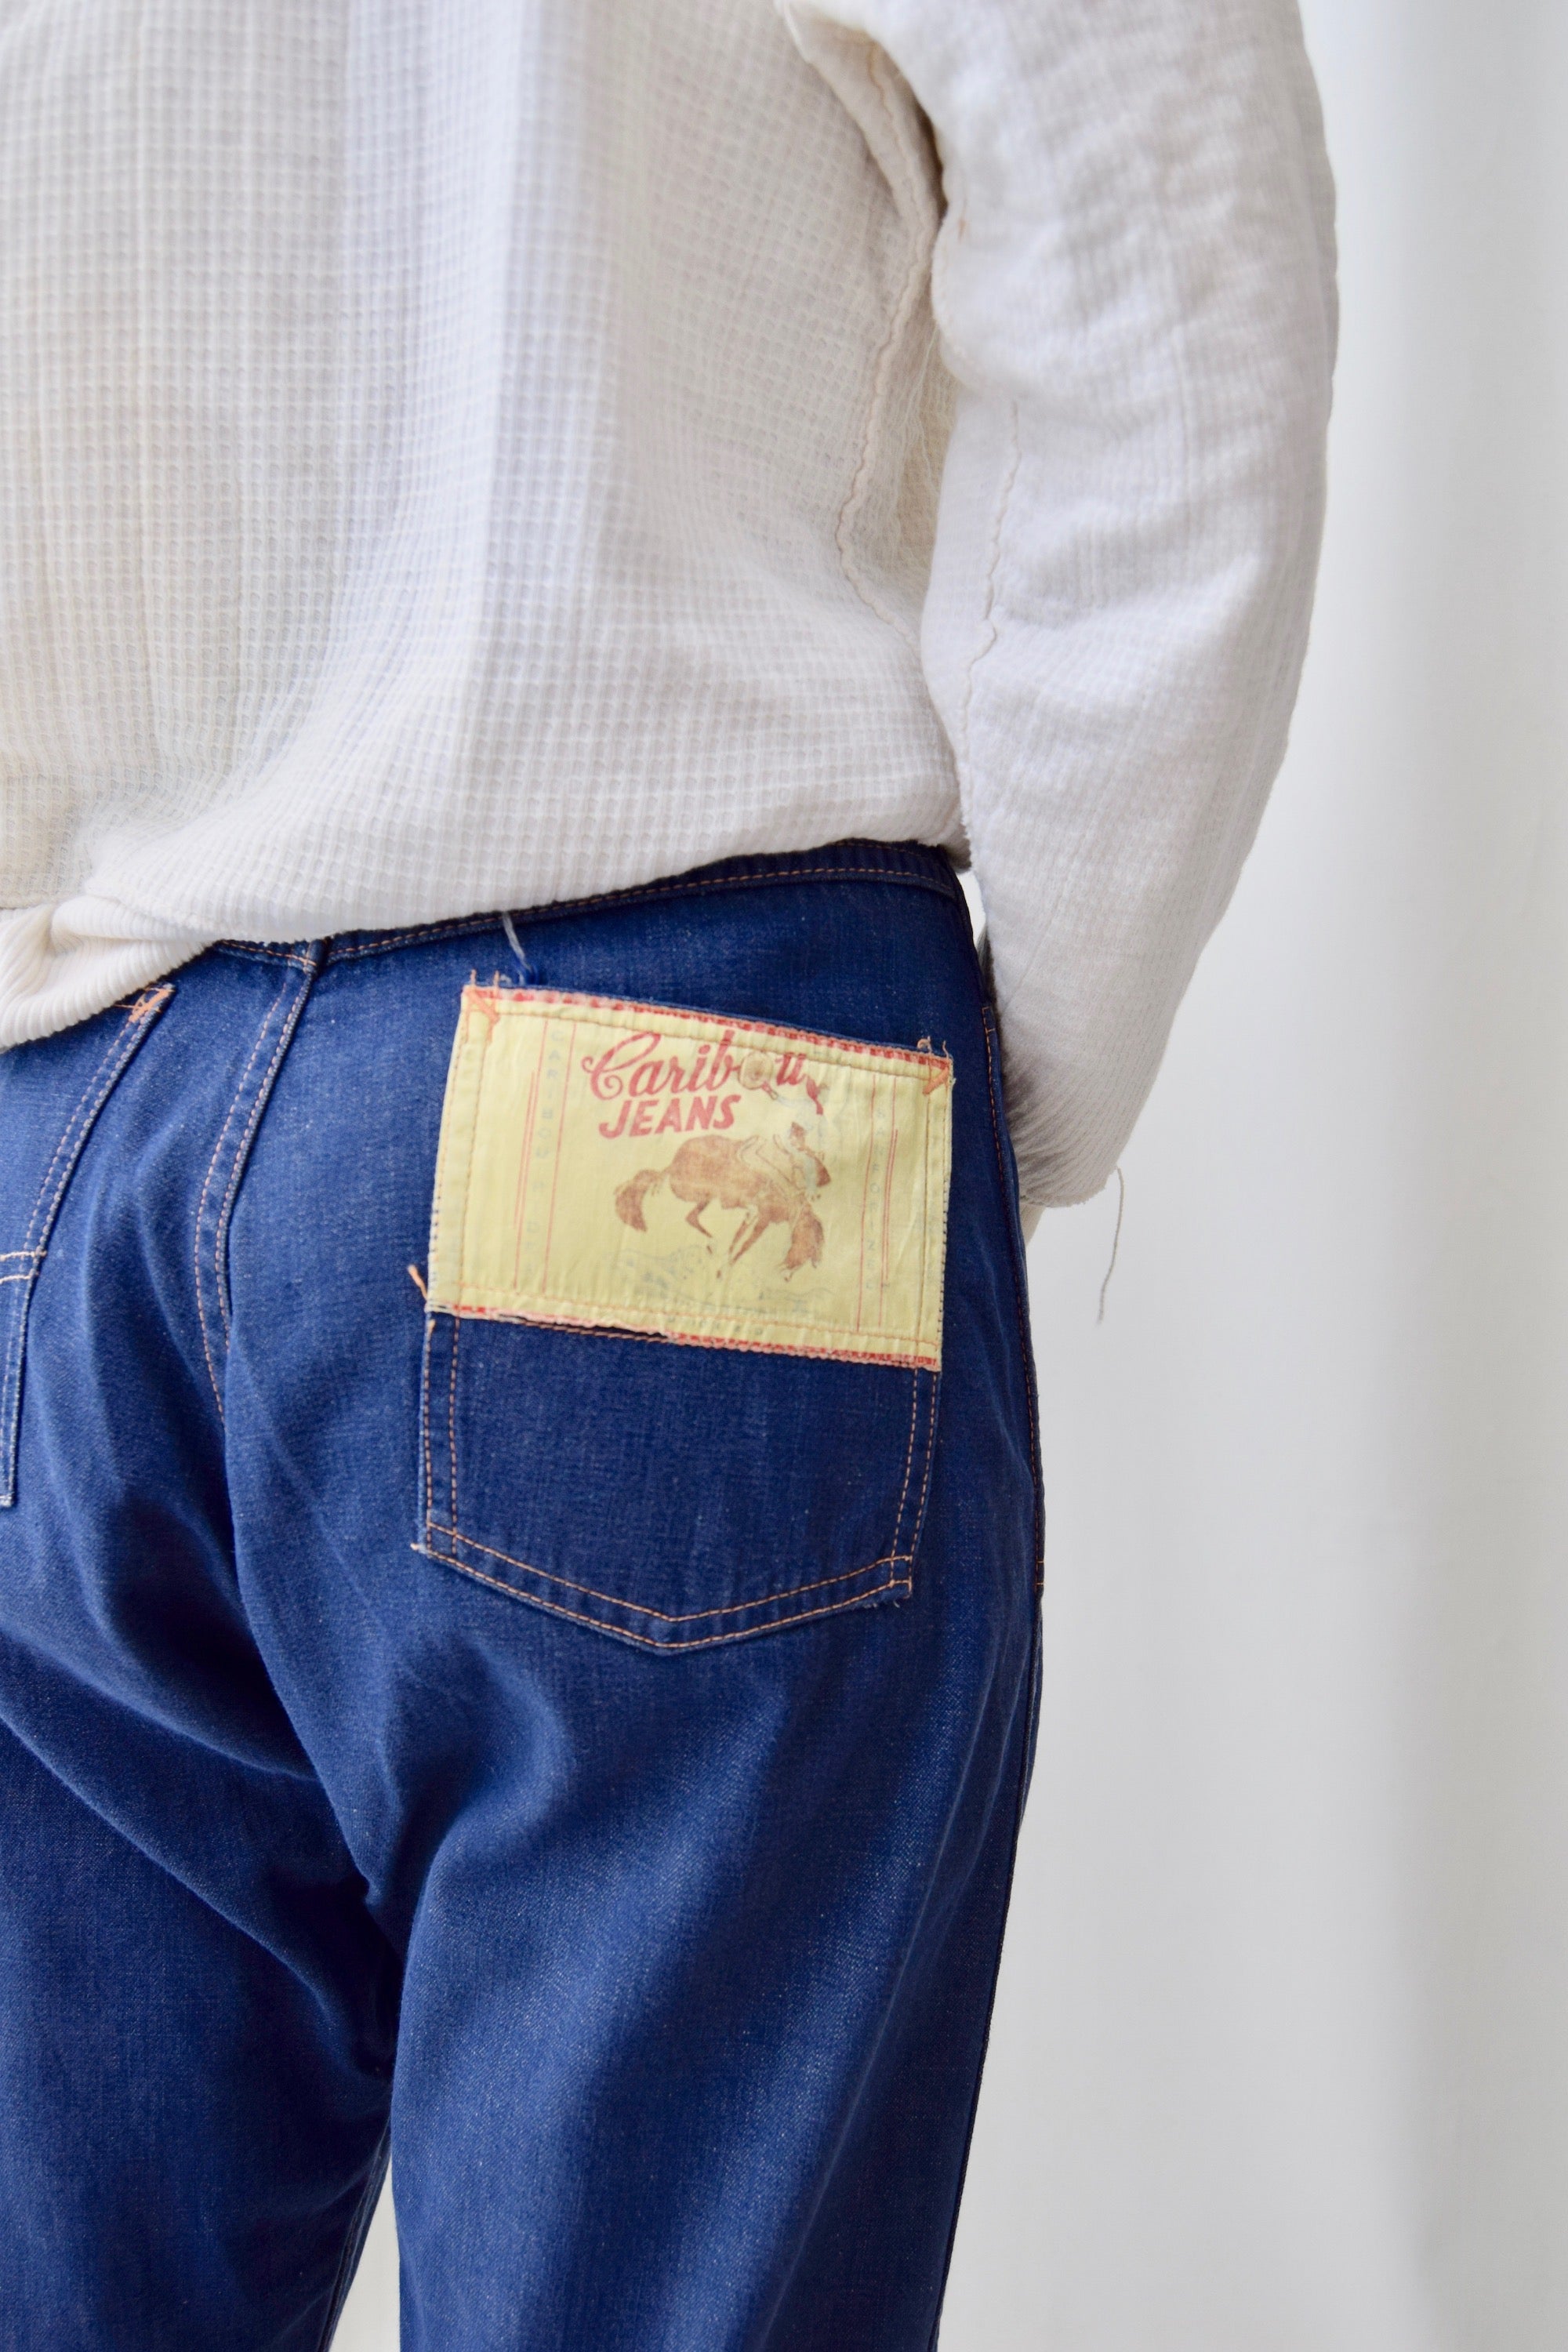 Fifties "Caribou Rider" Side Zip Jeans